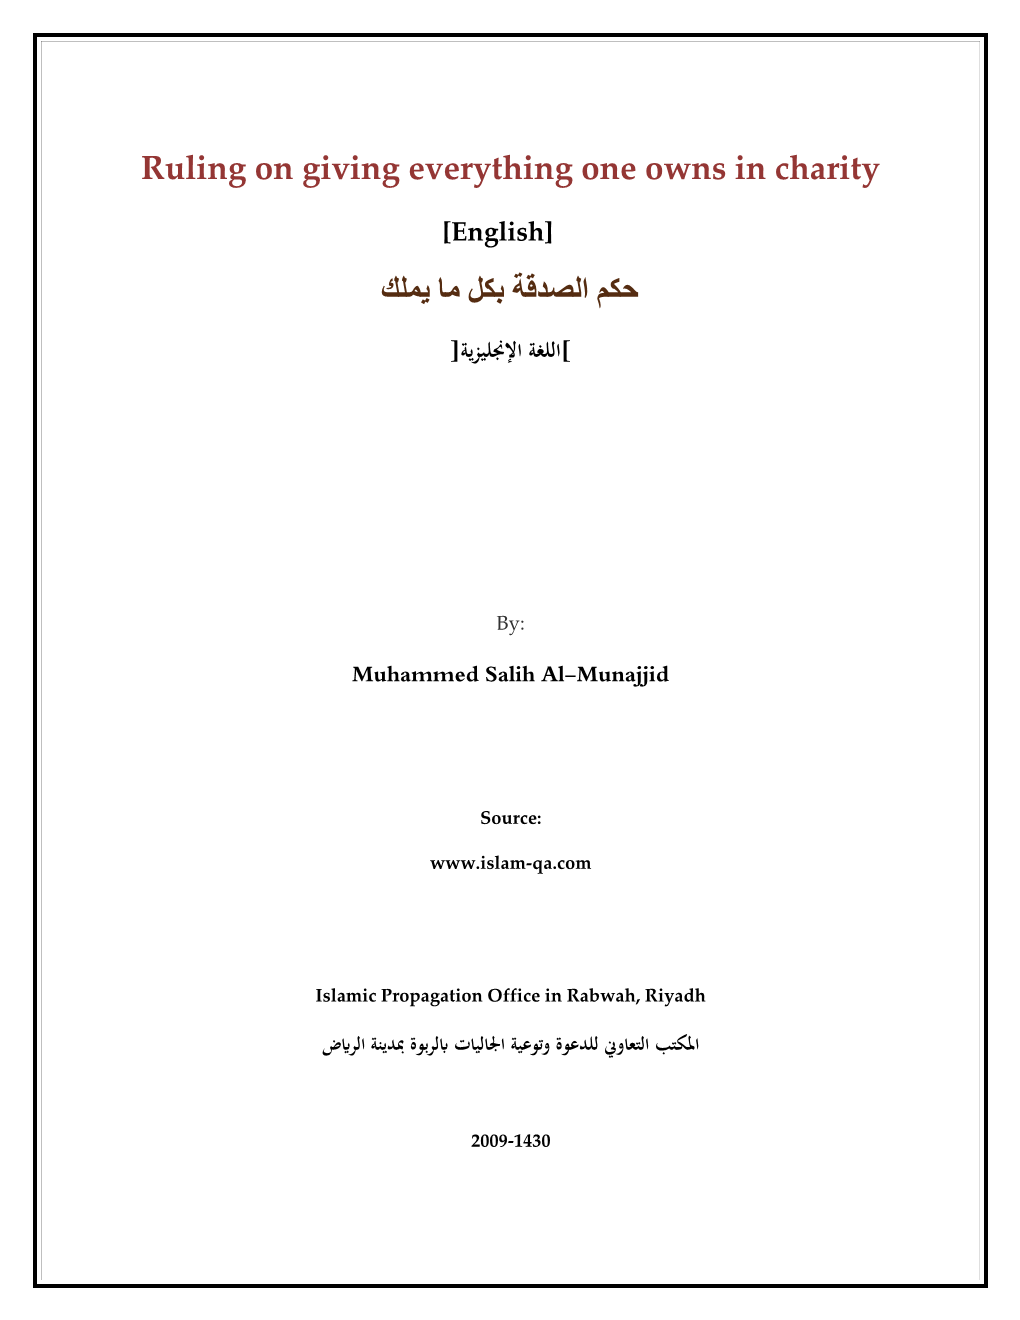 Ruling on Giving Everything One Owns in Charity